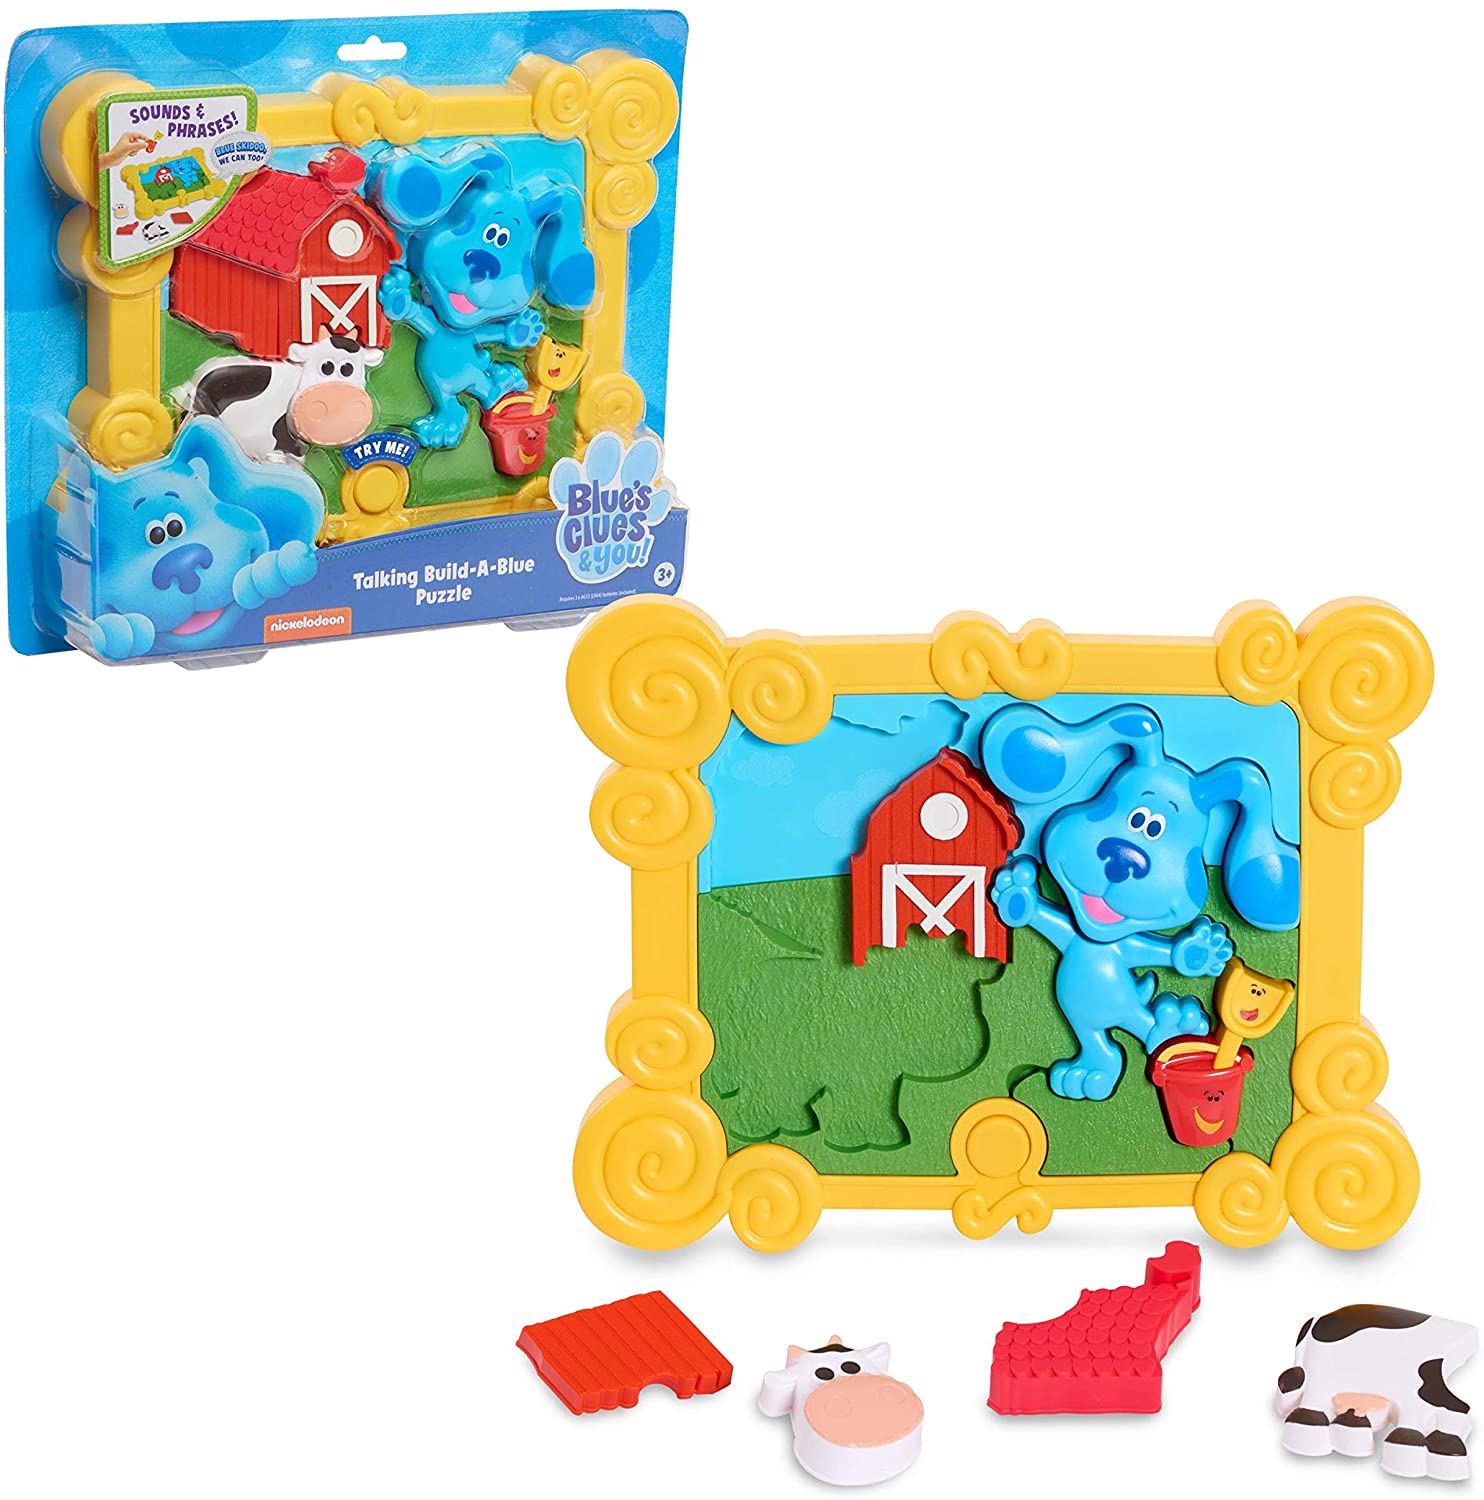 Blue’s Clues & You! Talking Build-a-Blue 9-Piece 3D Puzzle $7.10 + Free Shipping w/ Amazon Prime or Orders $25+